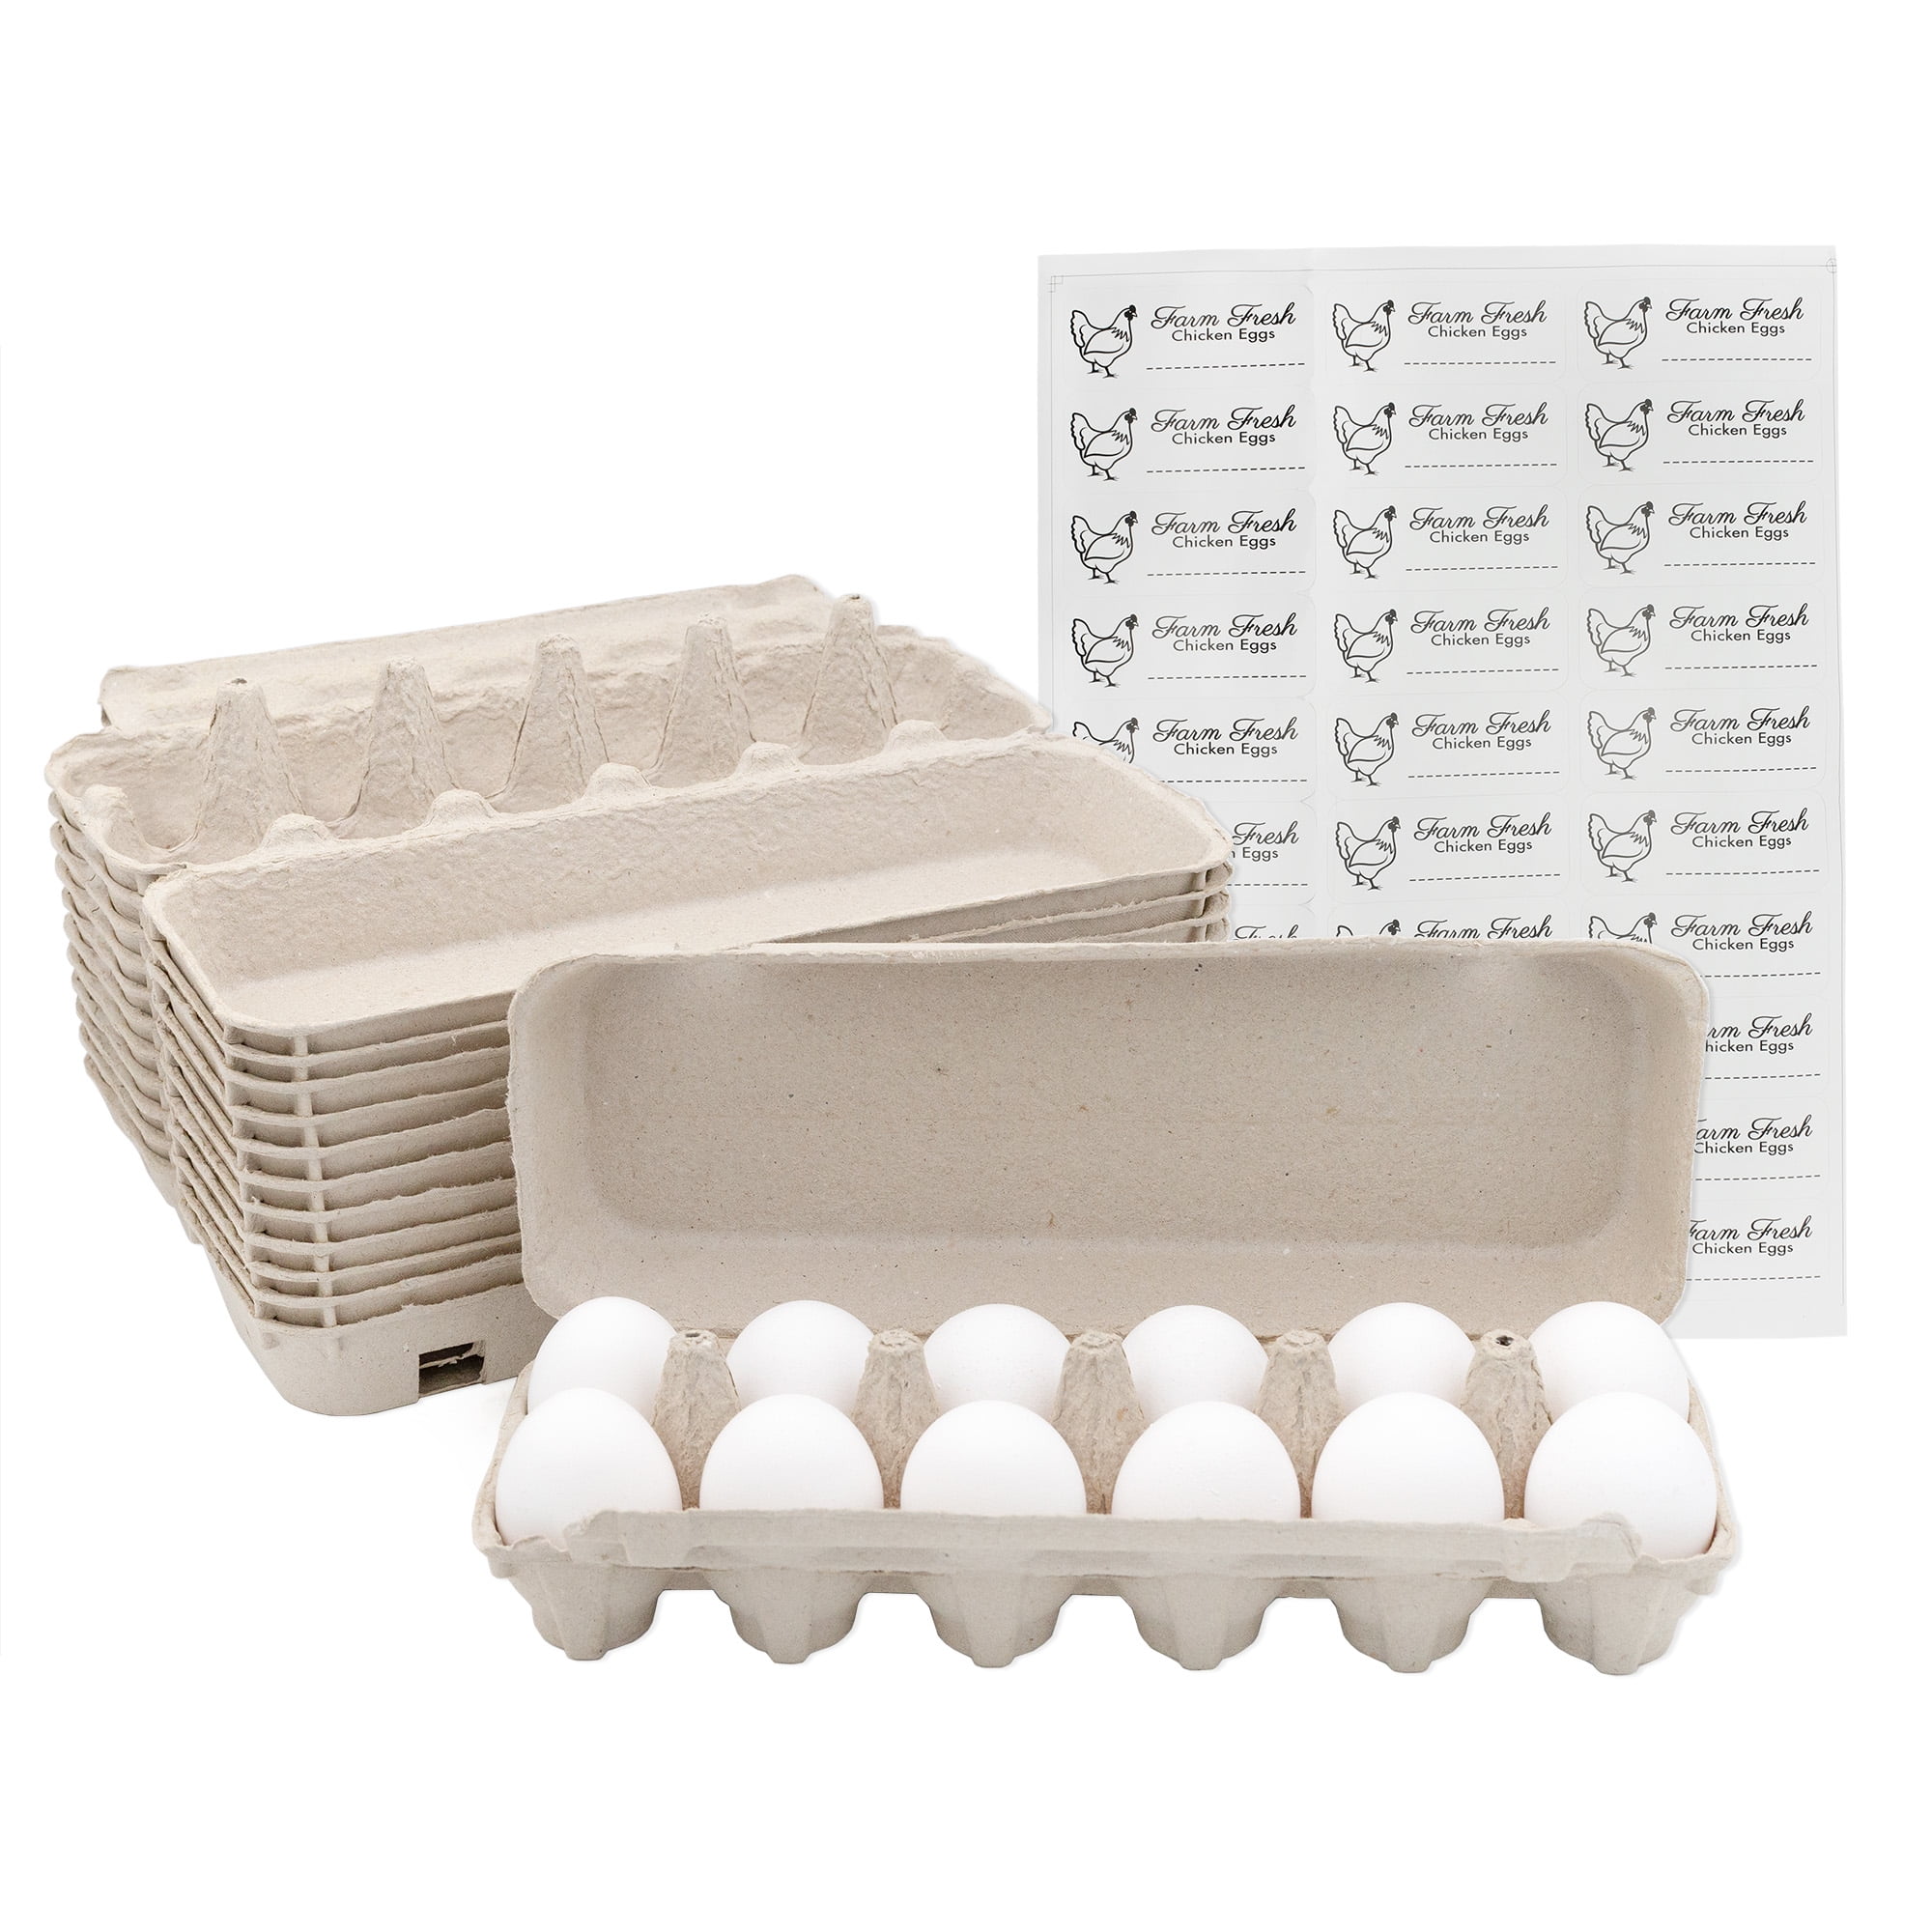 Cornucopia Cardboard Egg Cartons (12-Pack); Each for One Dozen,  Eco-friendly Recycled Material Biodegradable 12-count Egg Cartons w/Labels